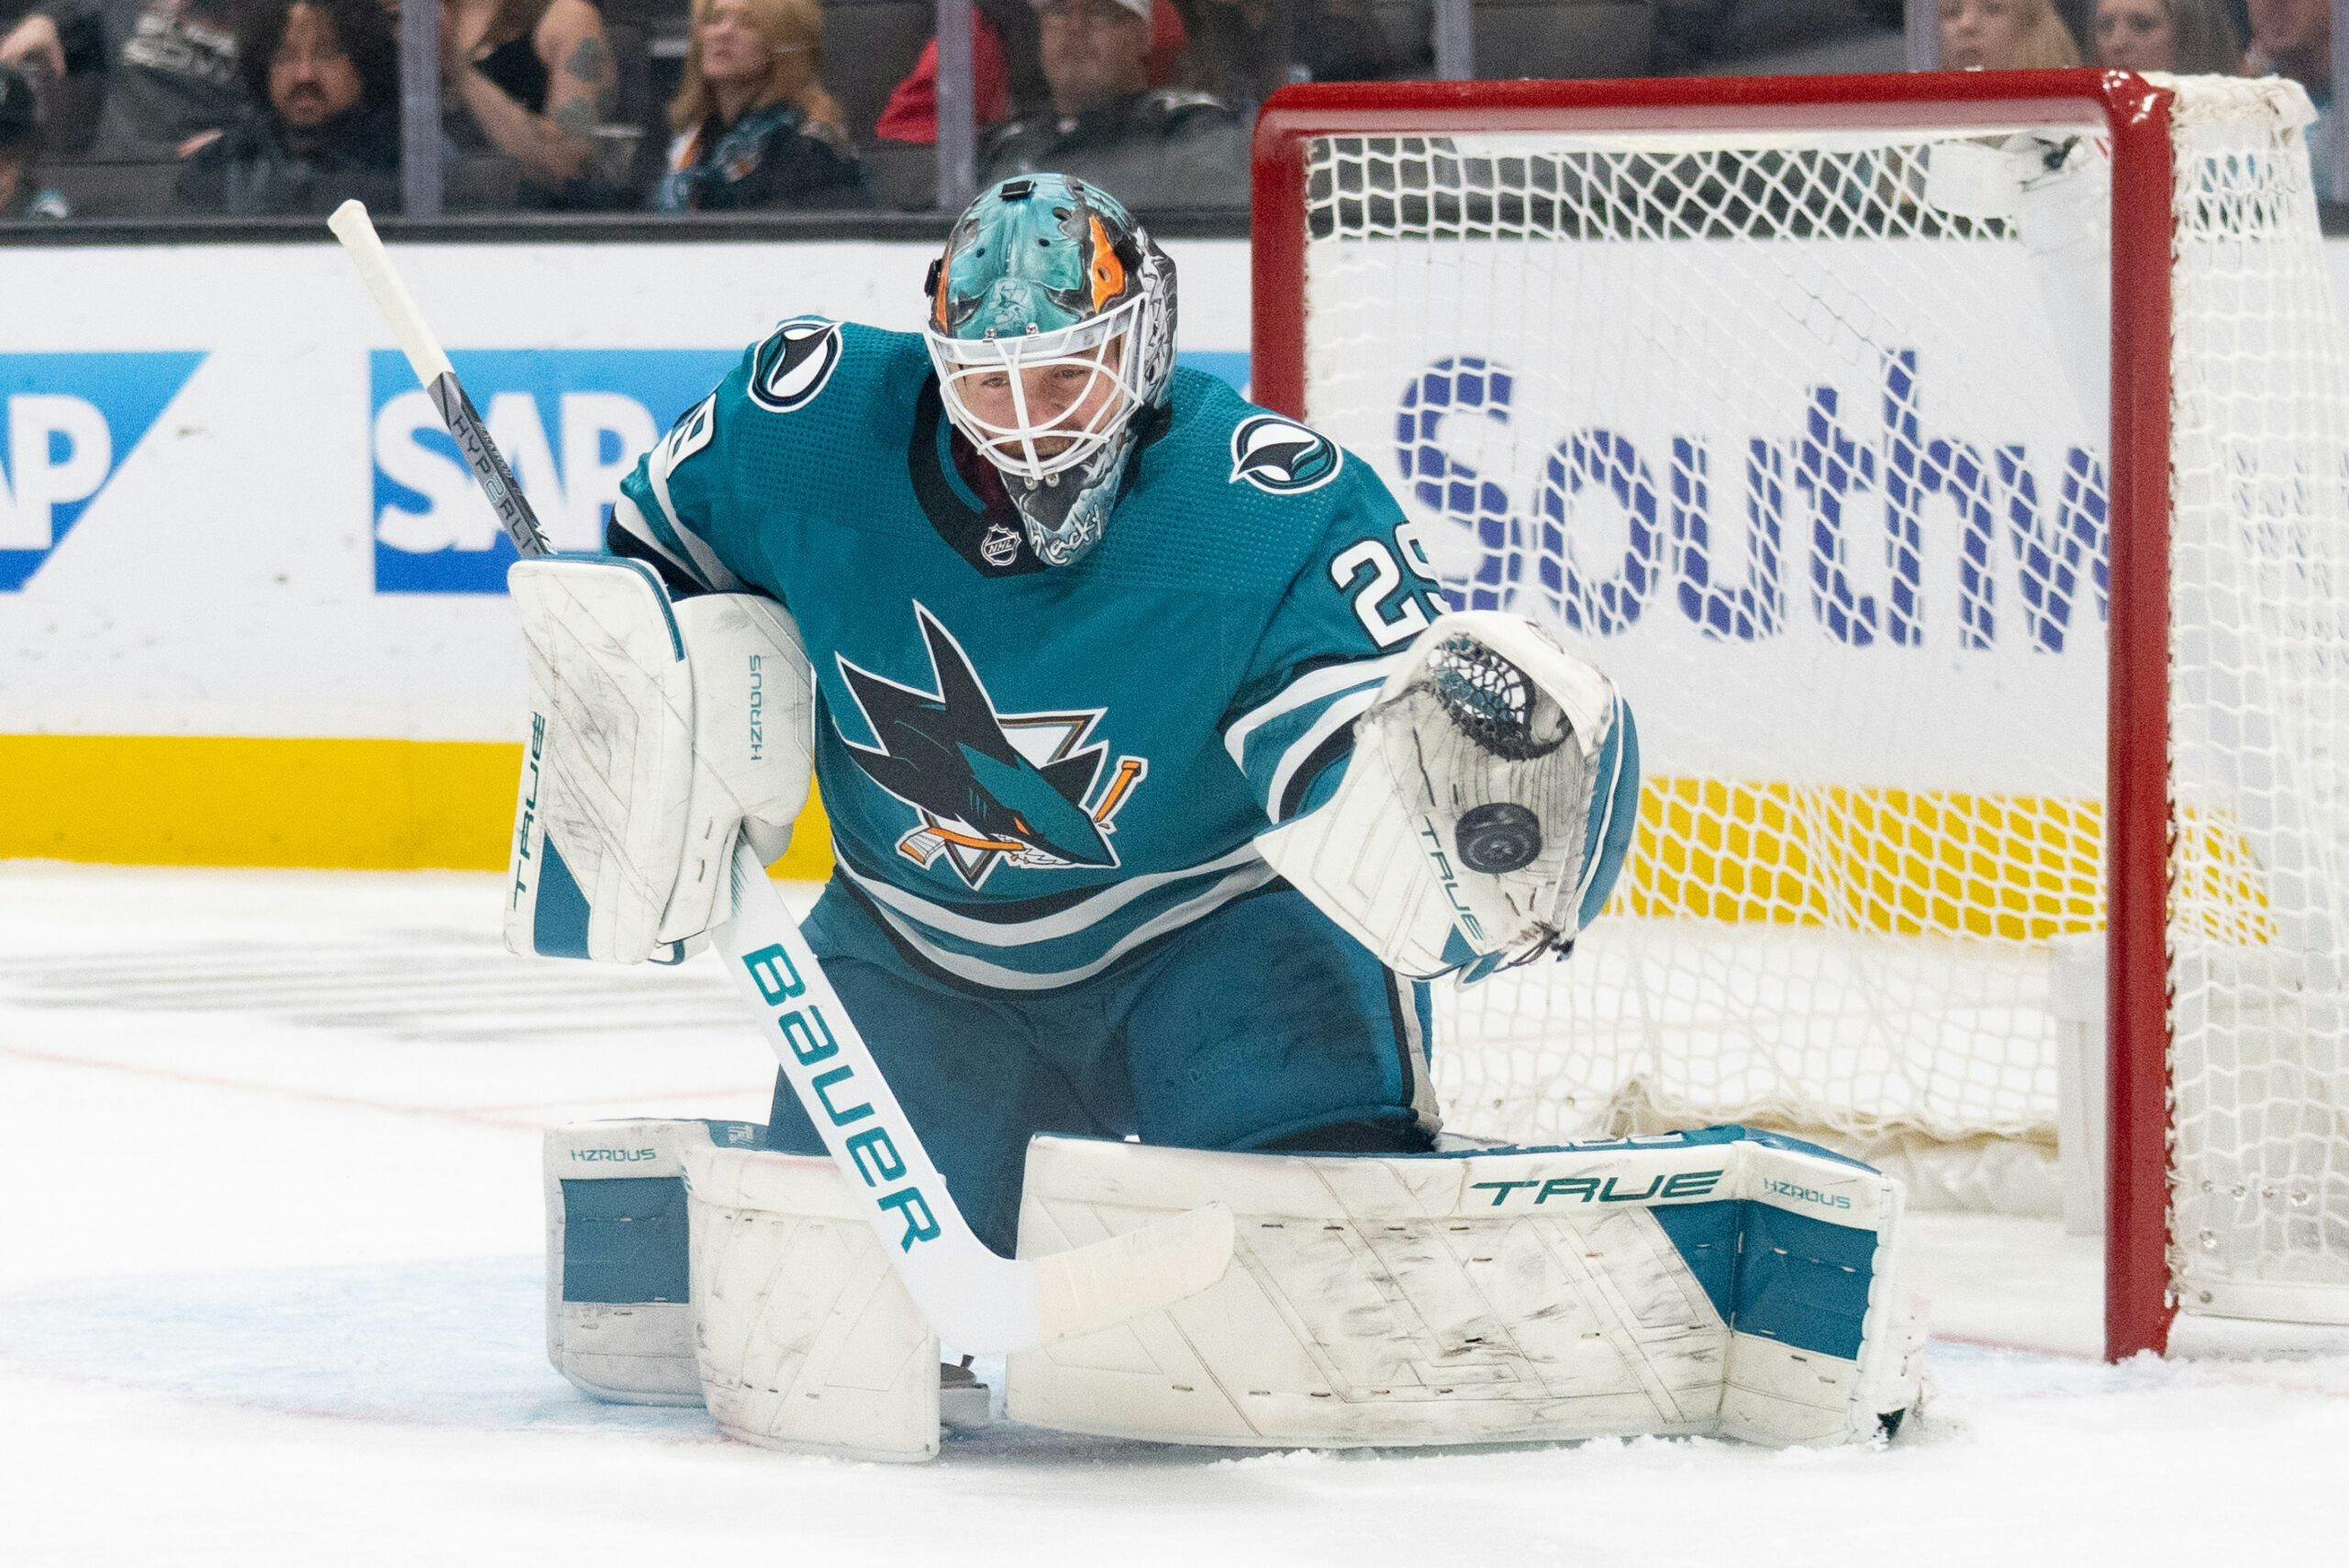 San Jose Sharks’ Blackwood expected to miss game with illness, MacDonald on injured reserve